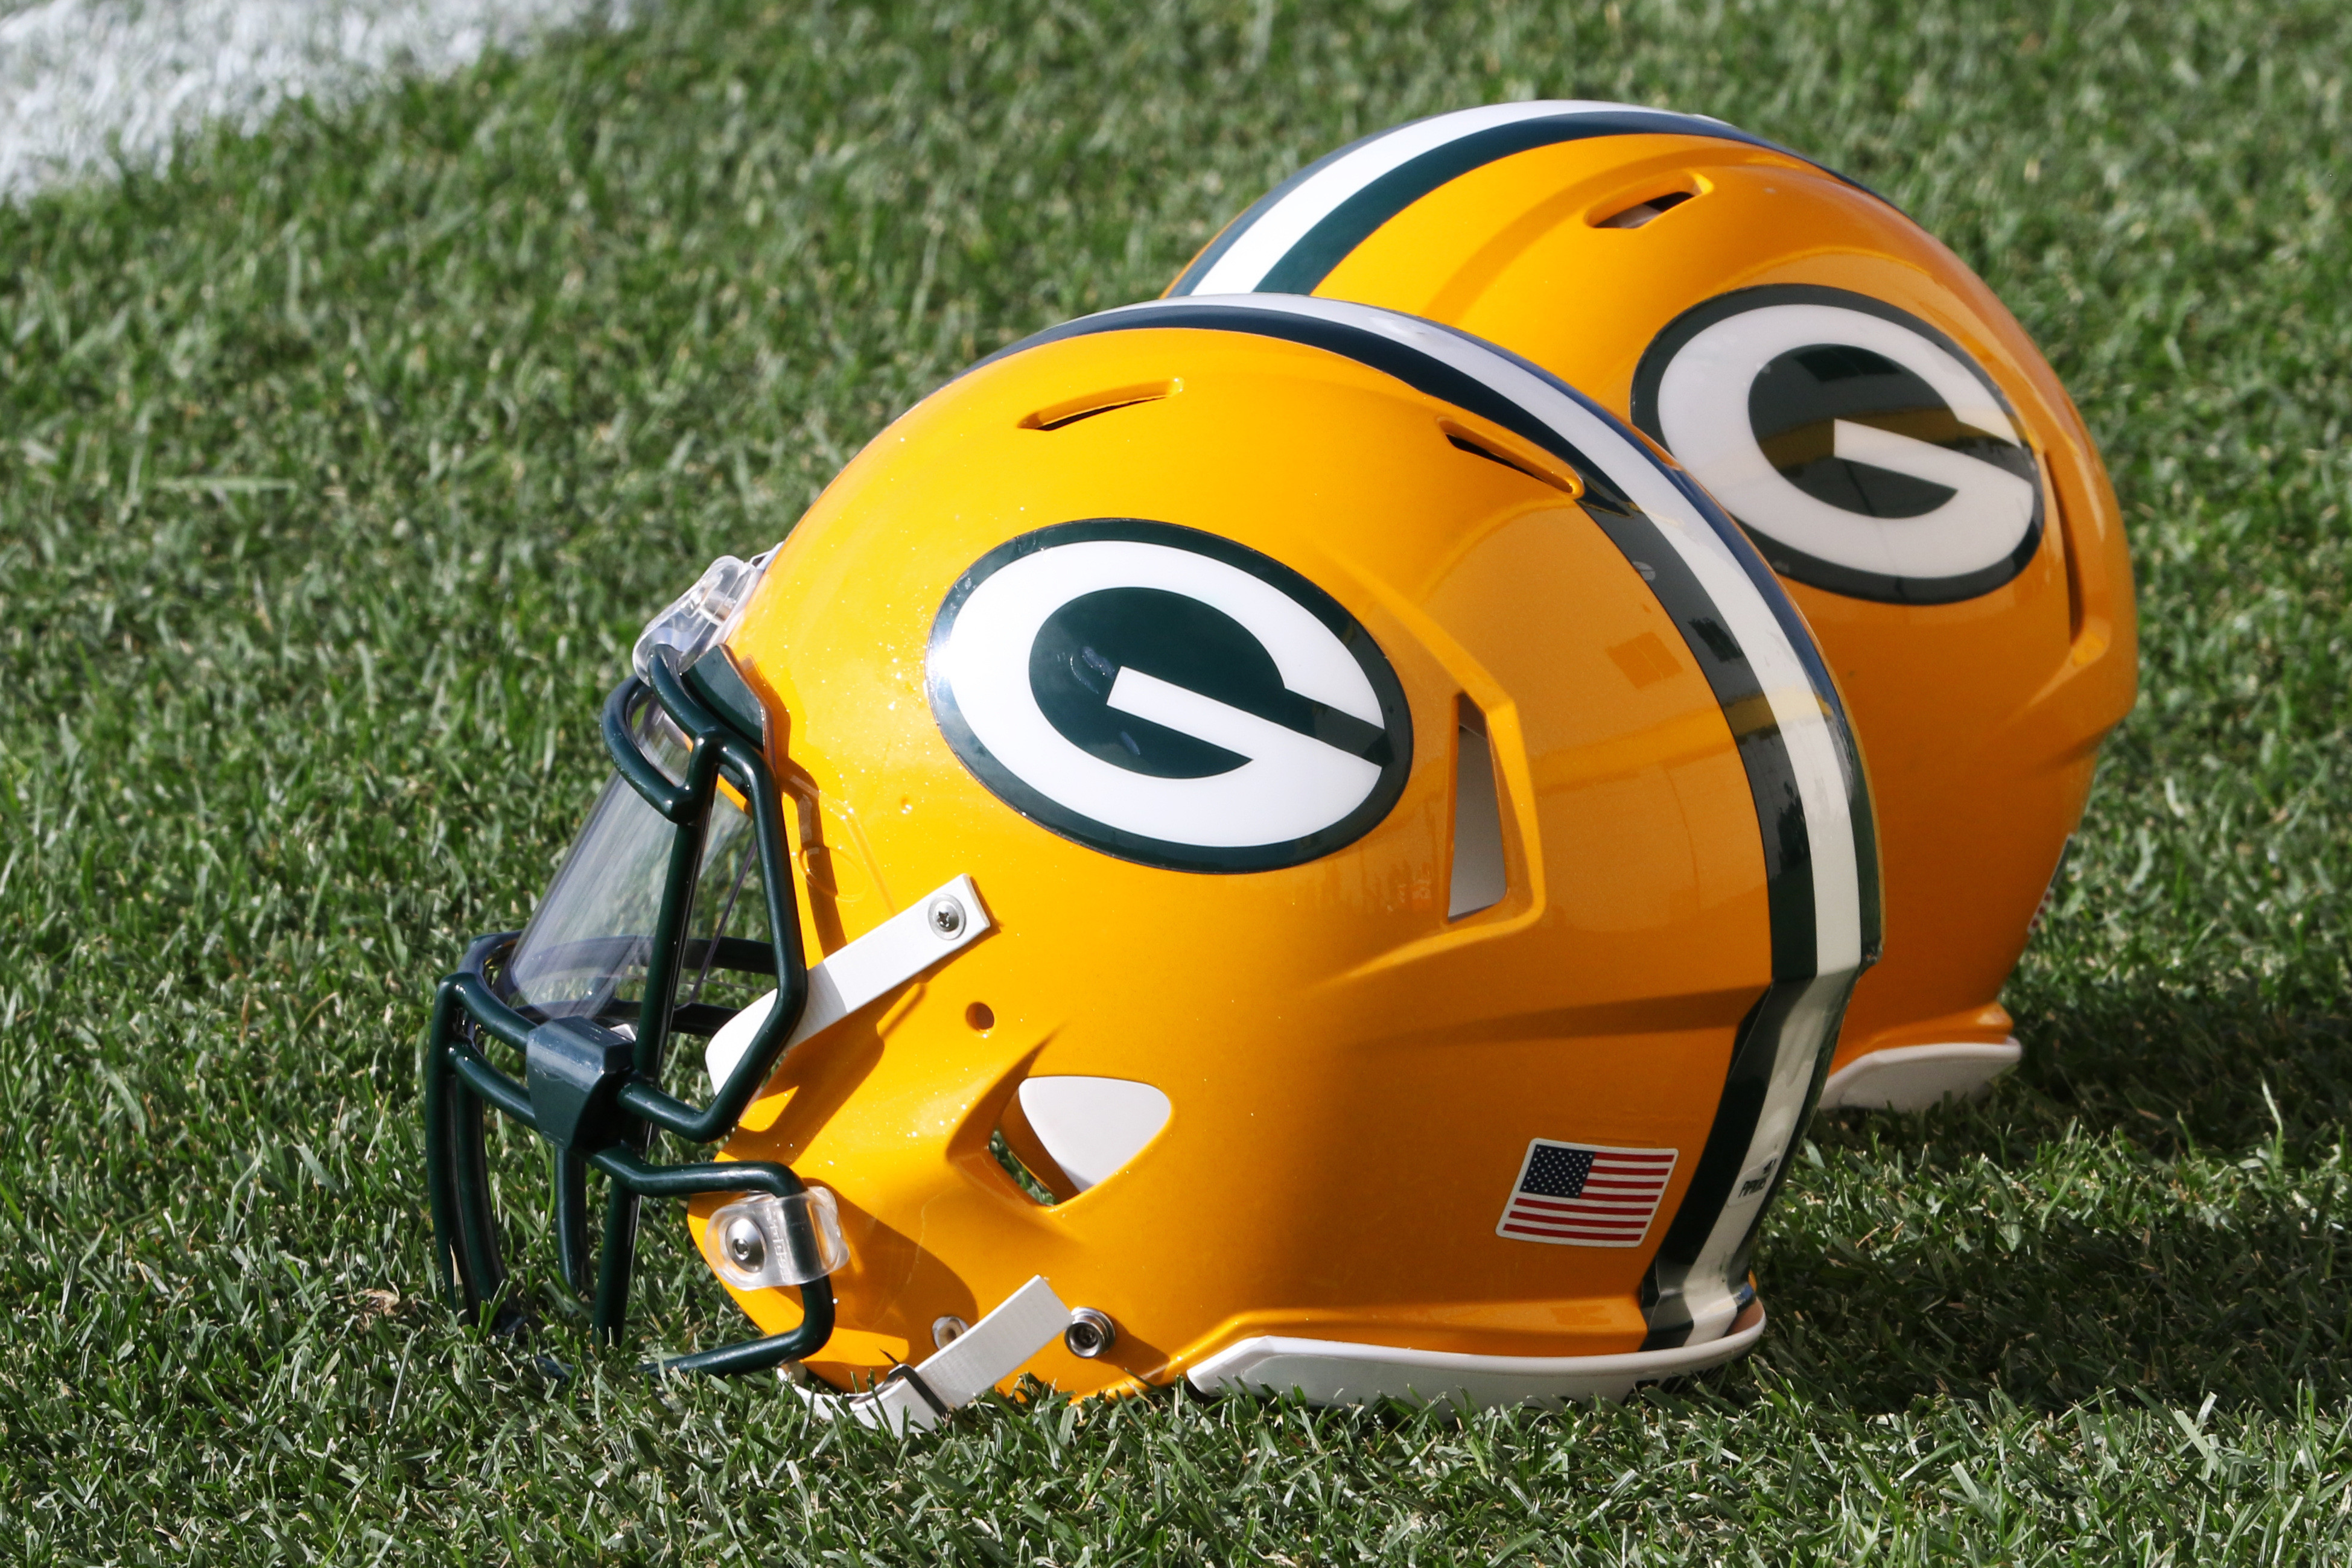 NFL: JUL 28 Packers Training Camp